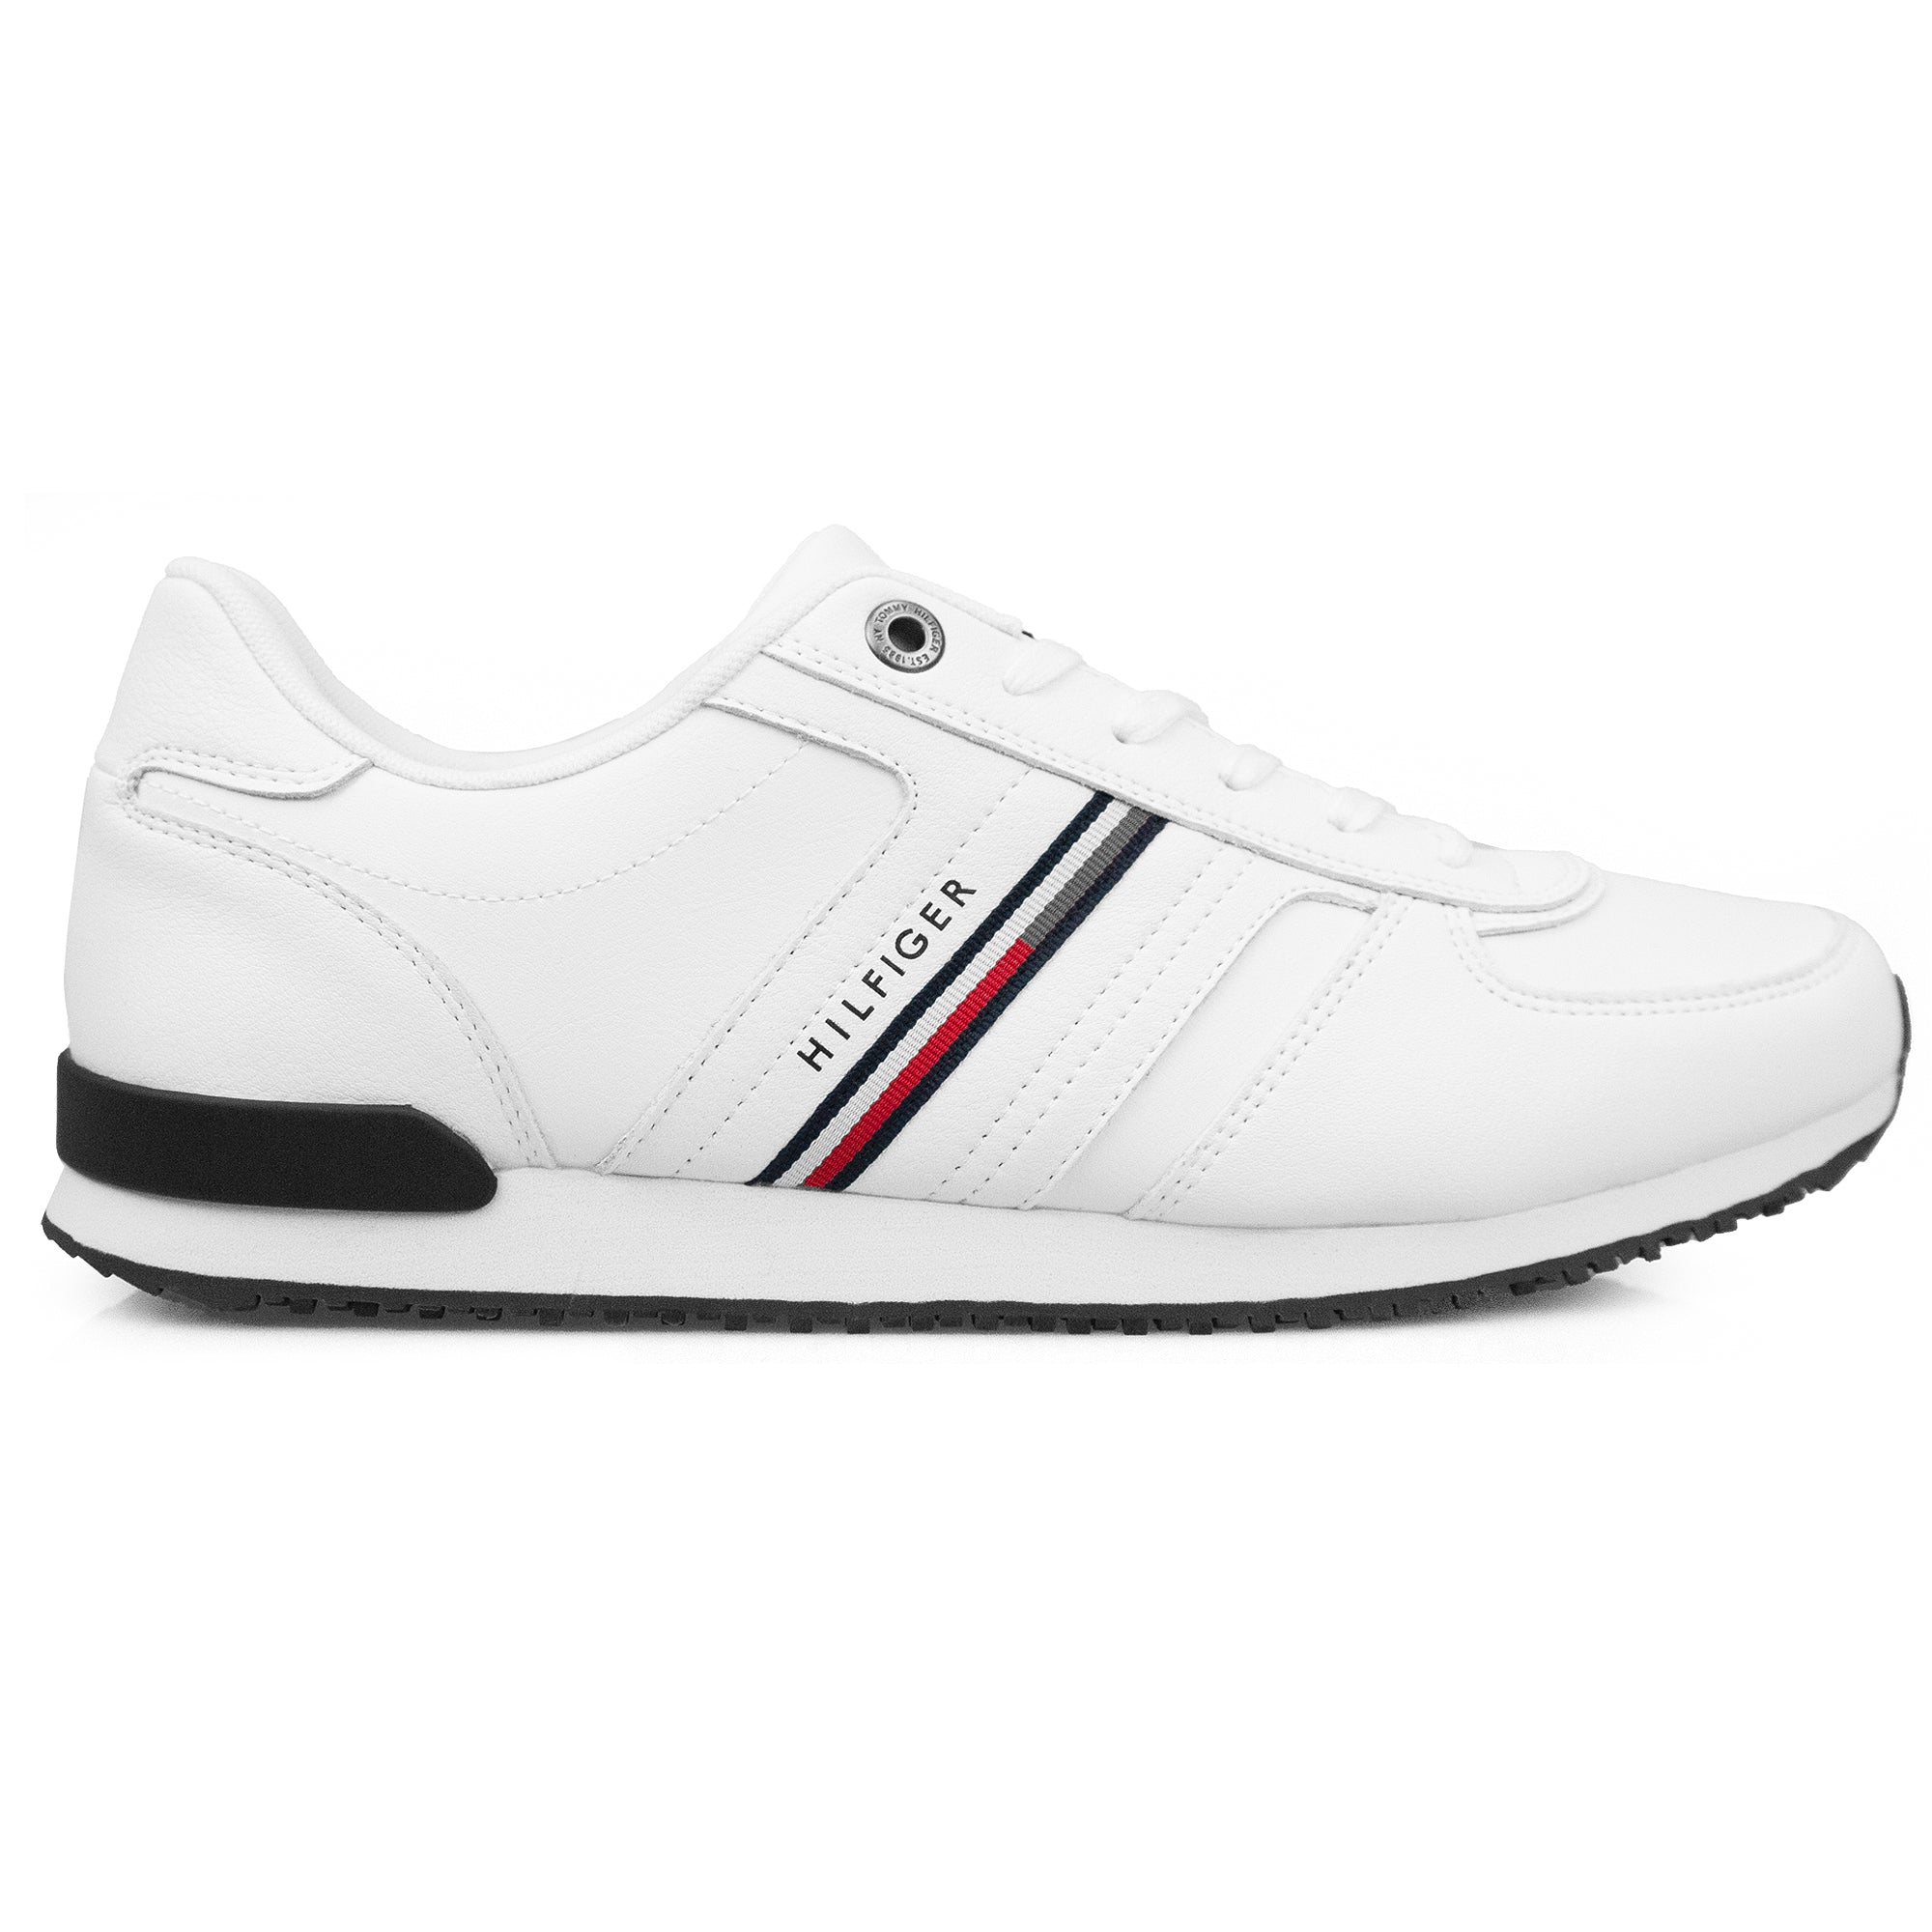 Tommy Hilfiger Iconic Leather Runner Stripes Trainers - White